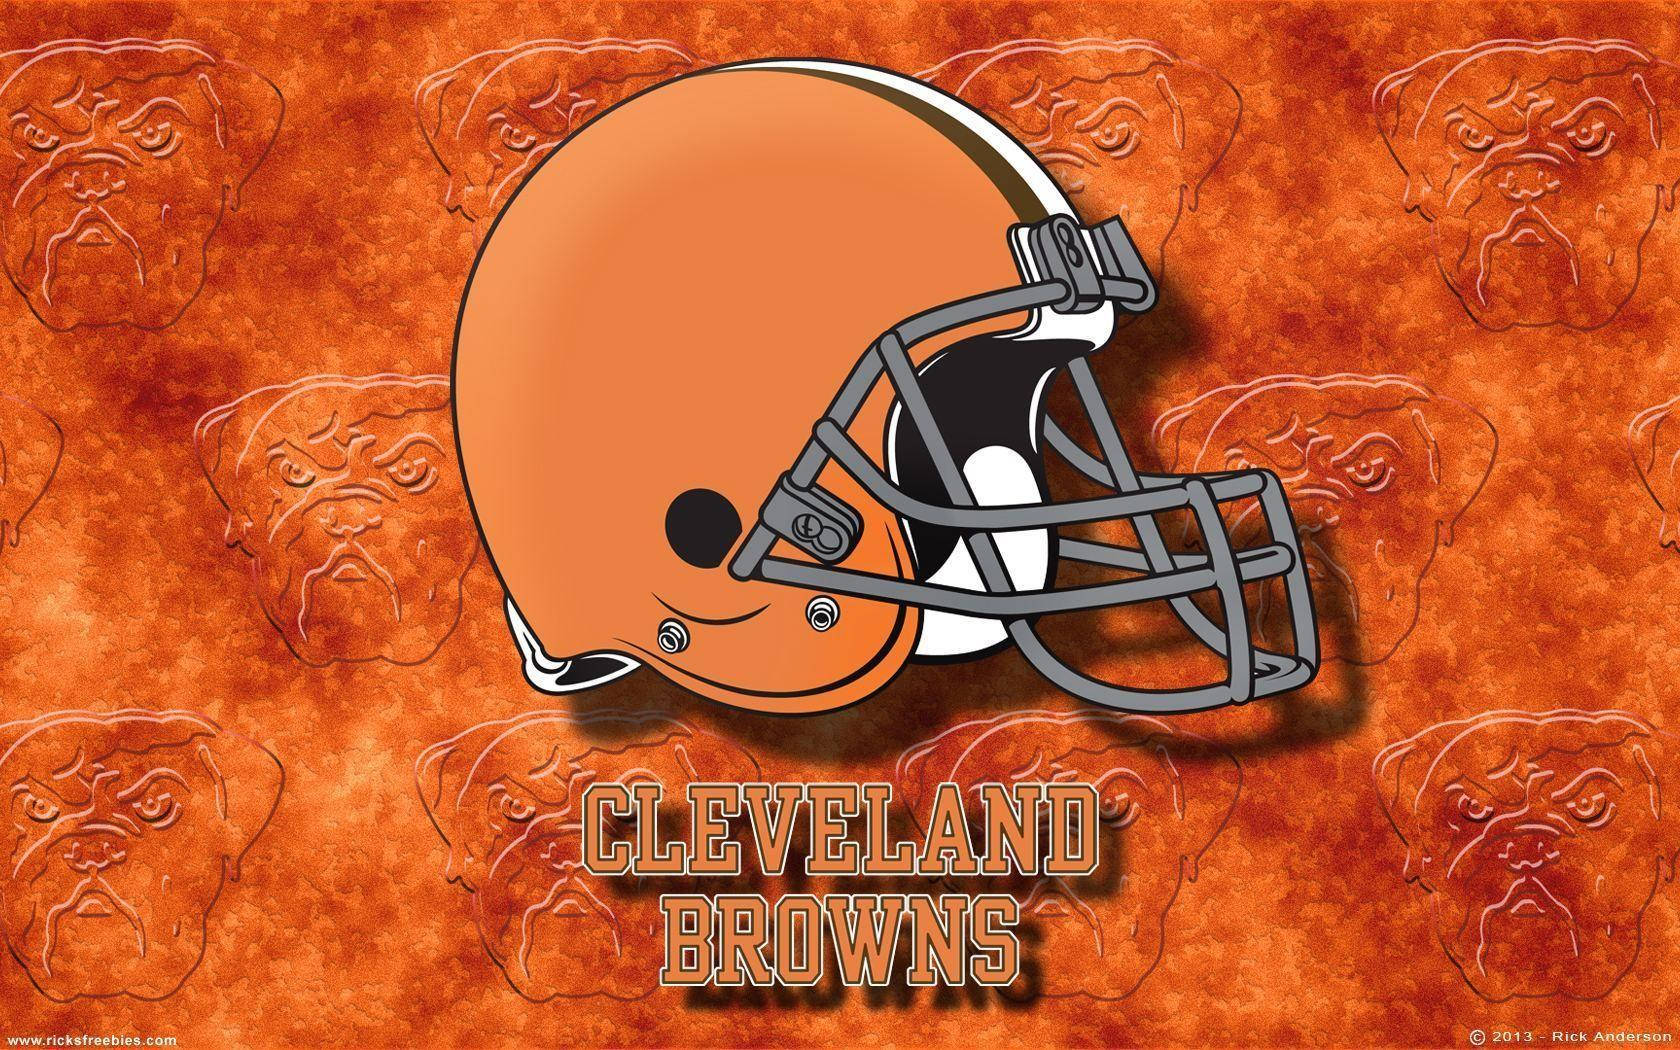 Cleveland browns backgrounds for free